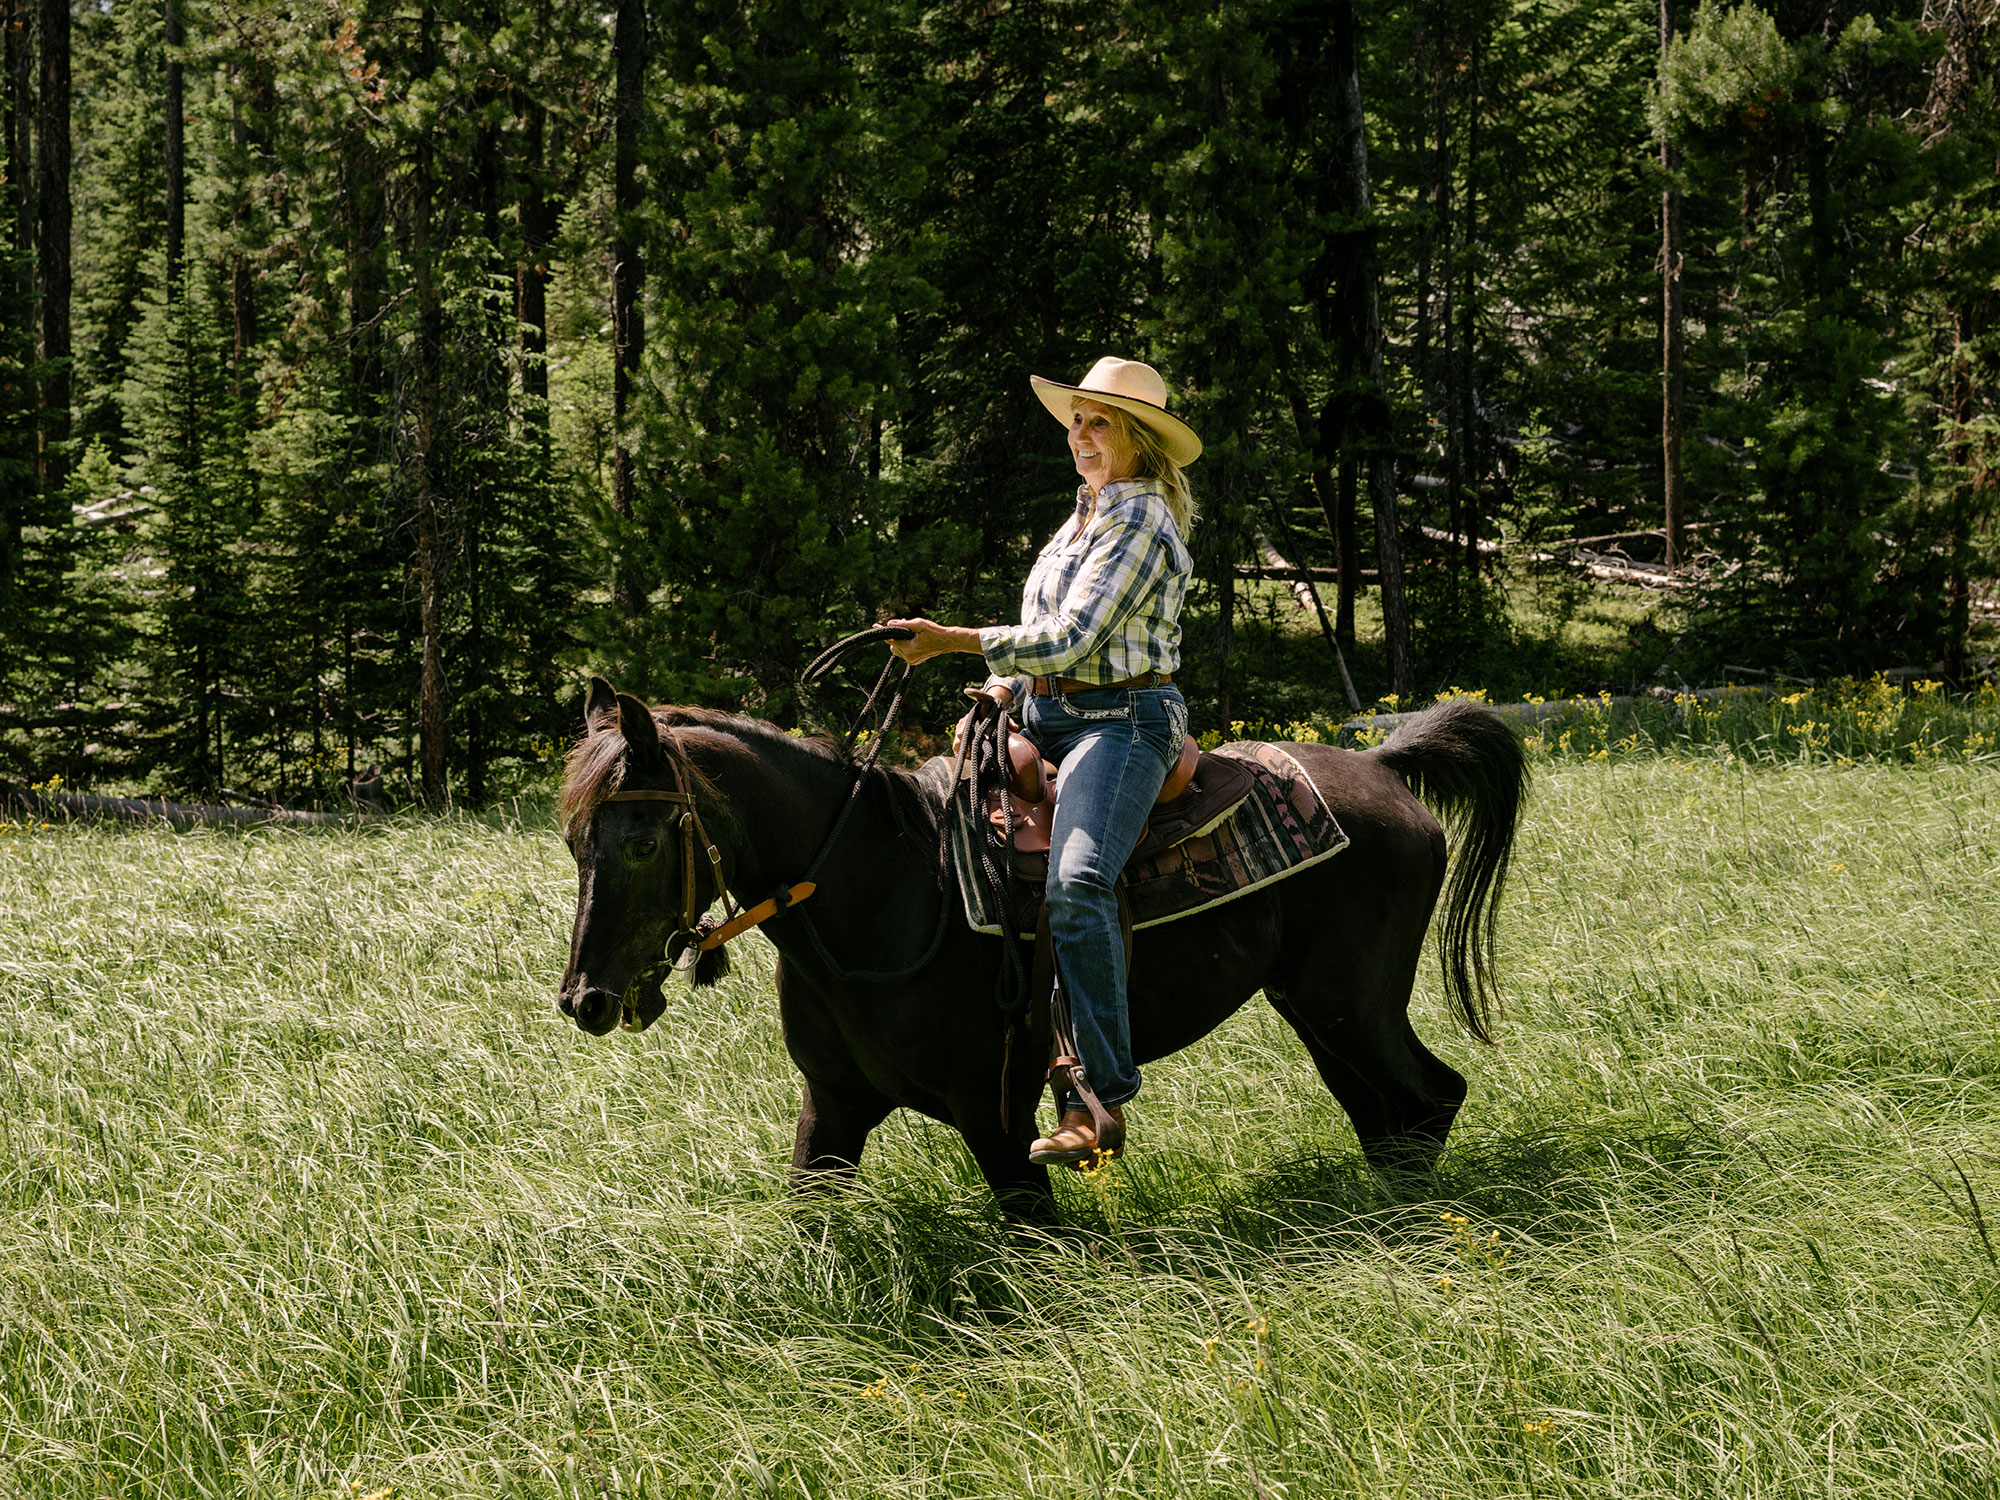 A woman riding a horse in a grassy field.